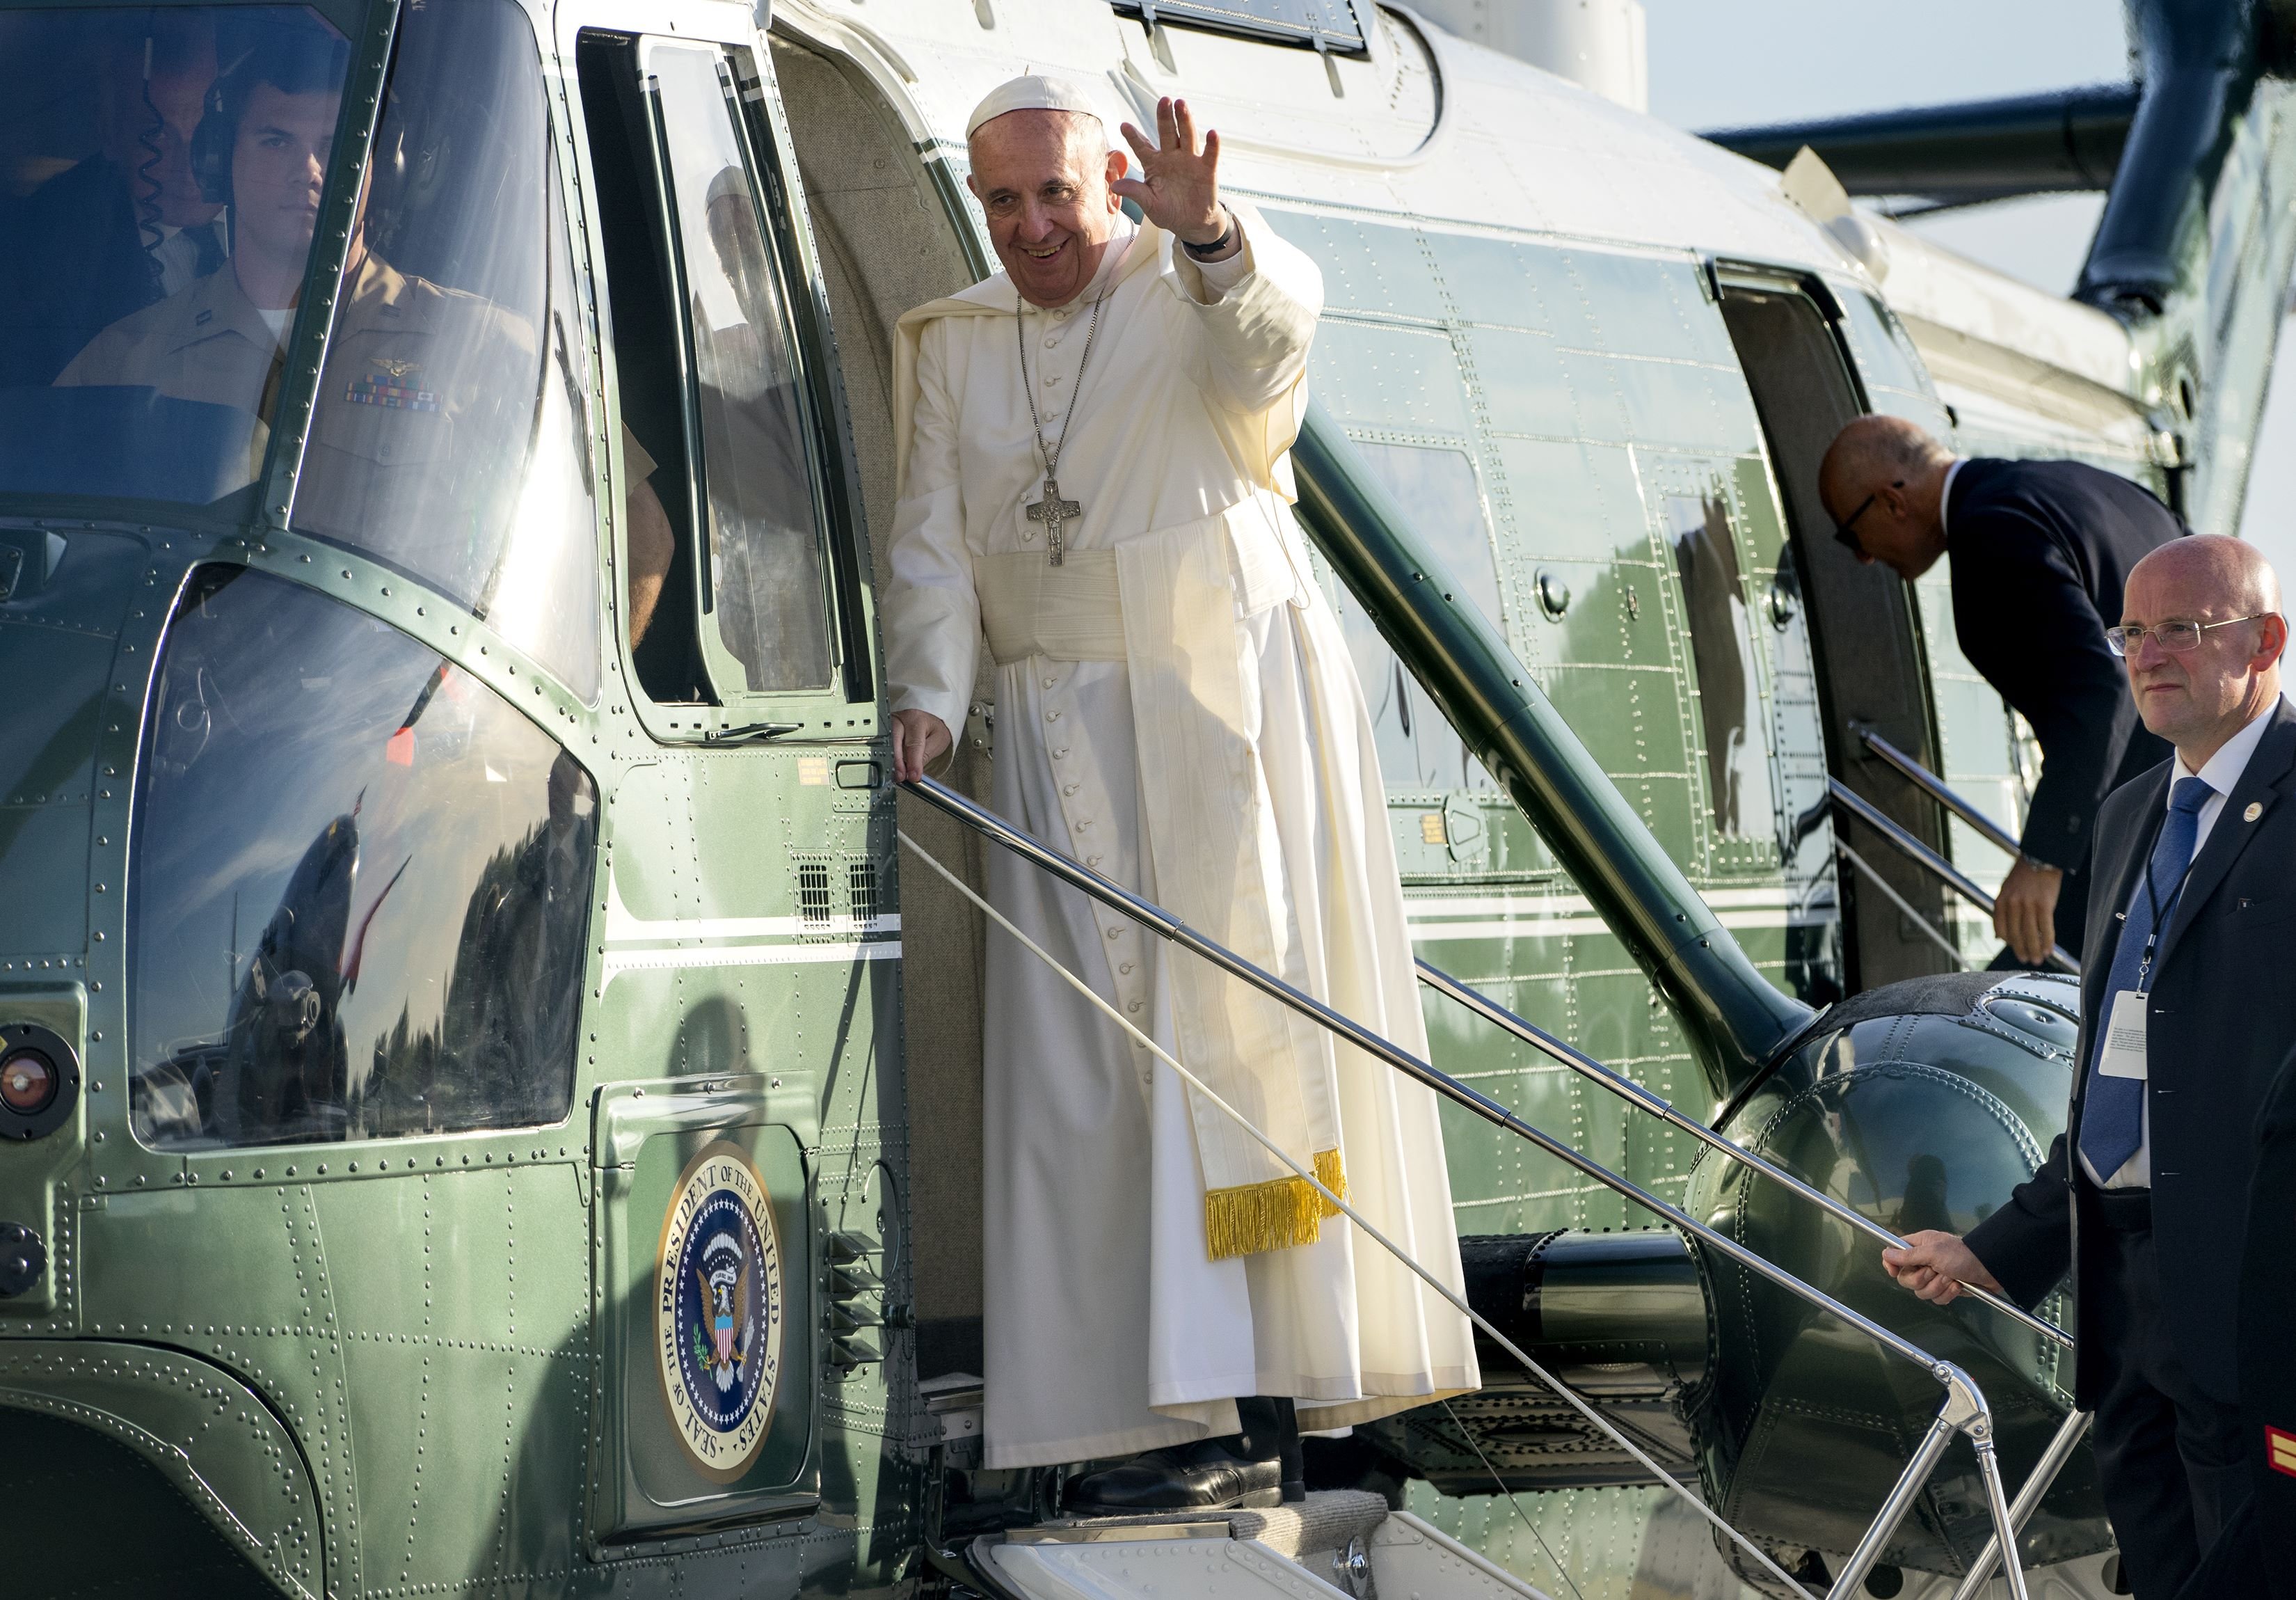 Pope Francis waves to supporters as he arrives at John F. Kennedy International Airport in New York, on Sept. 24, 2015.